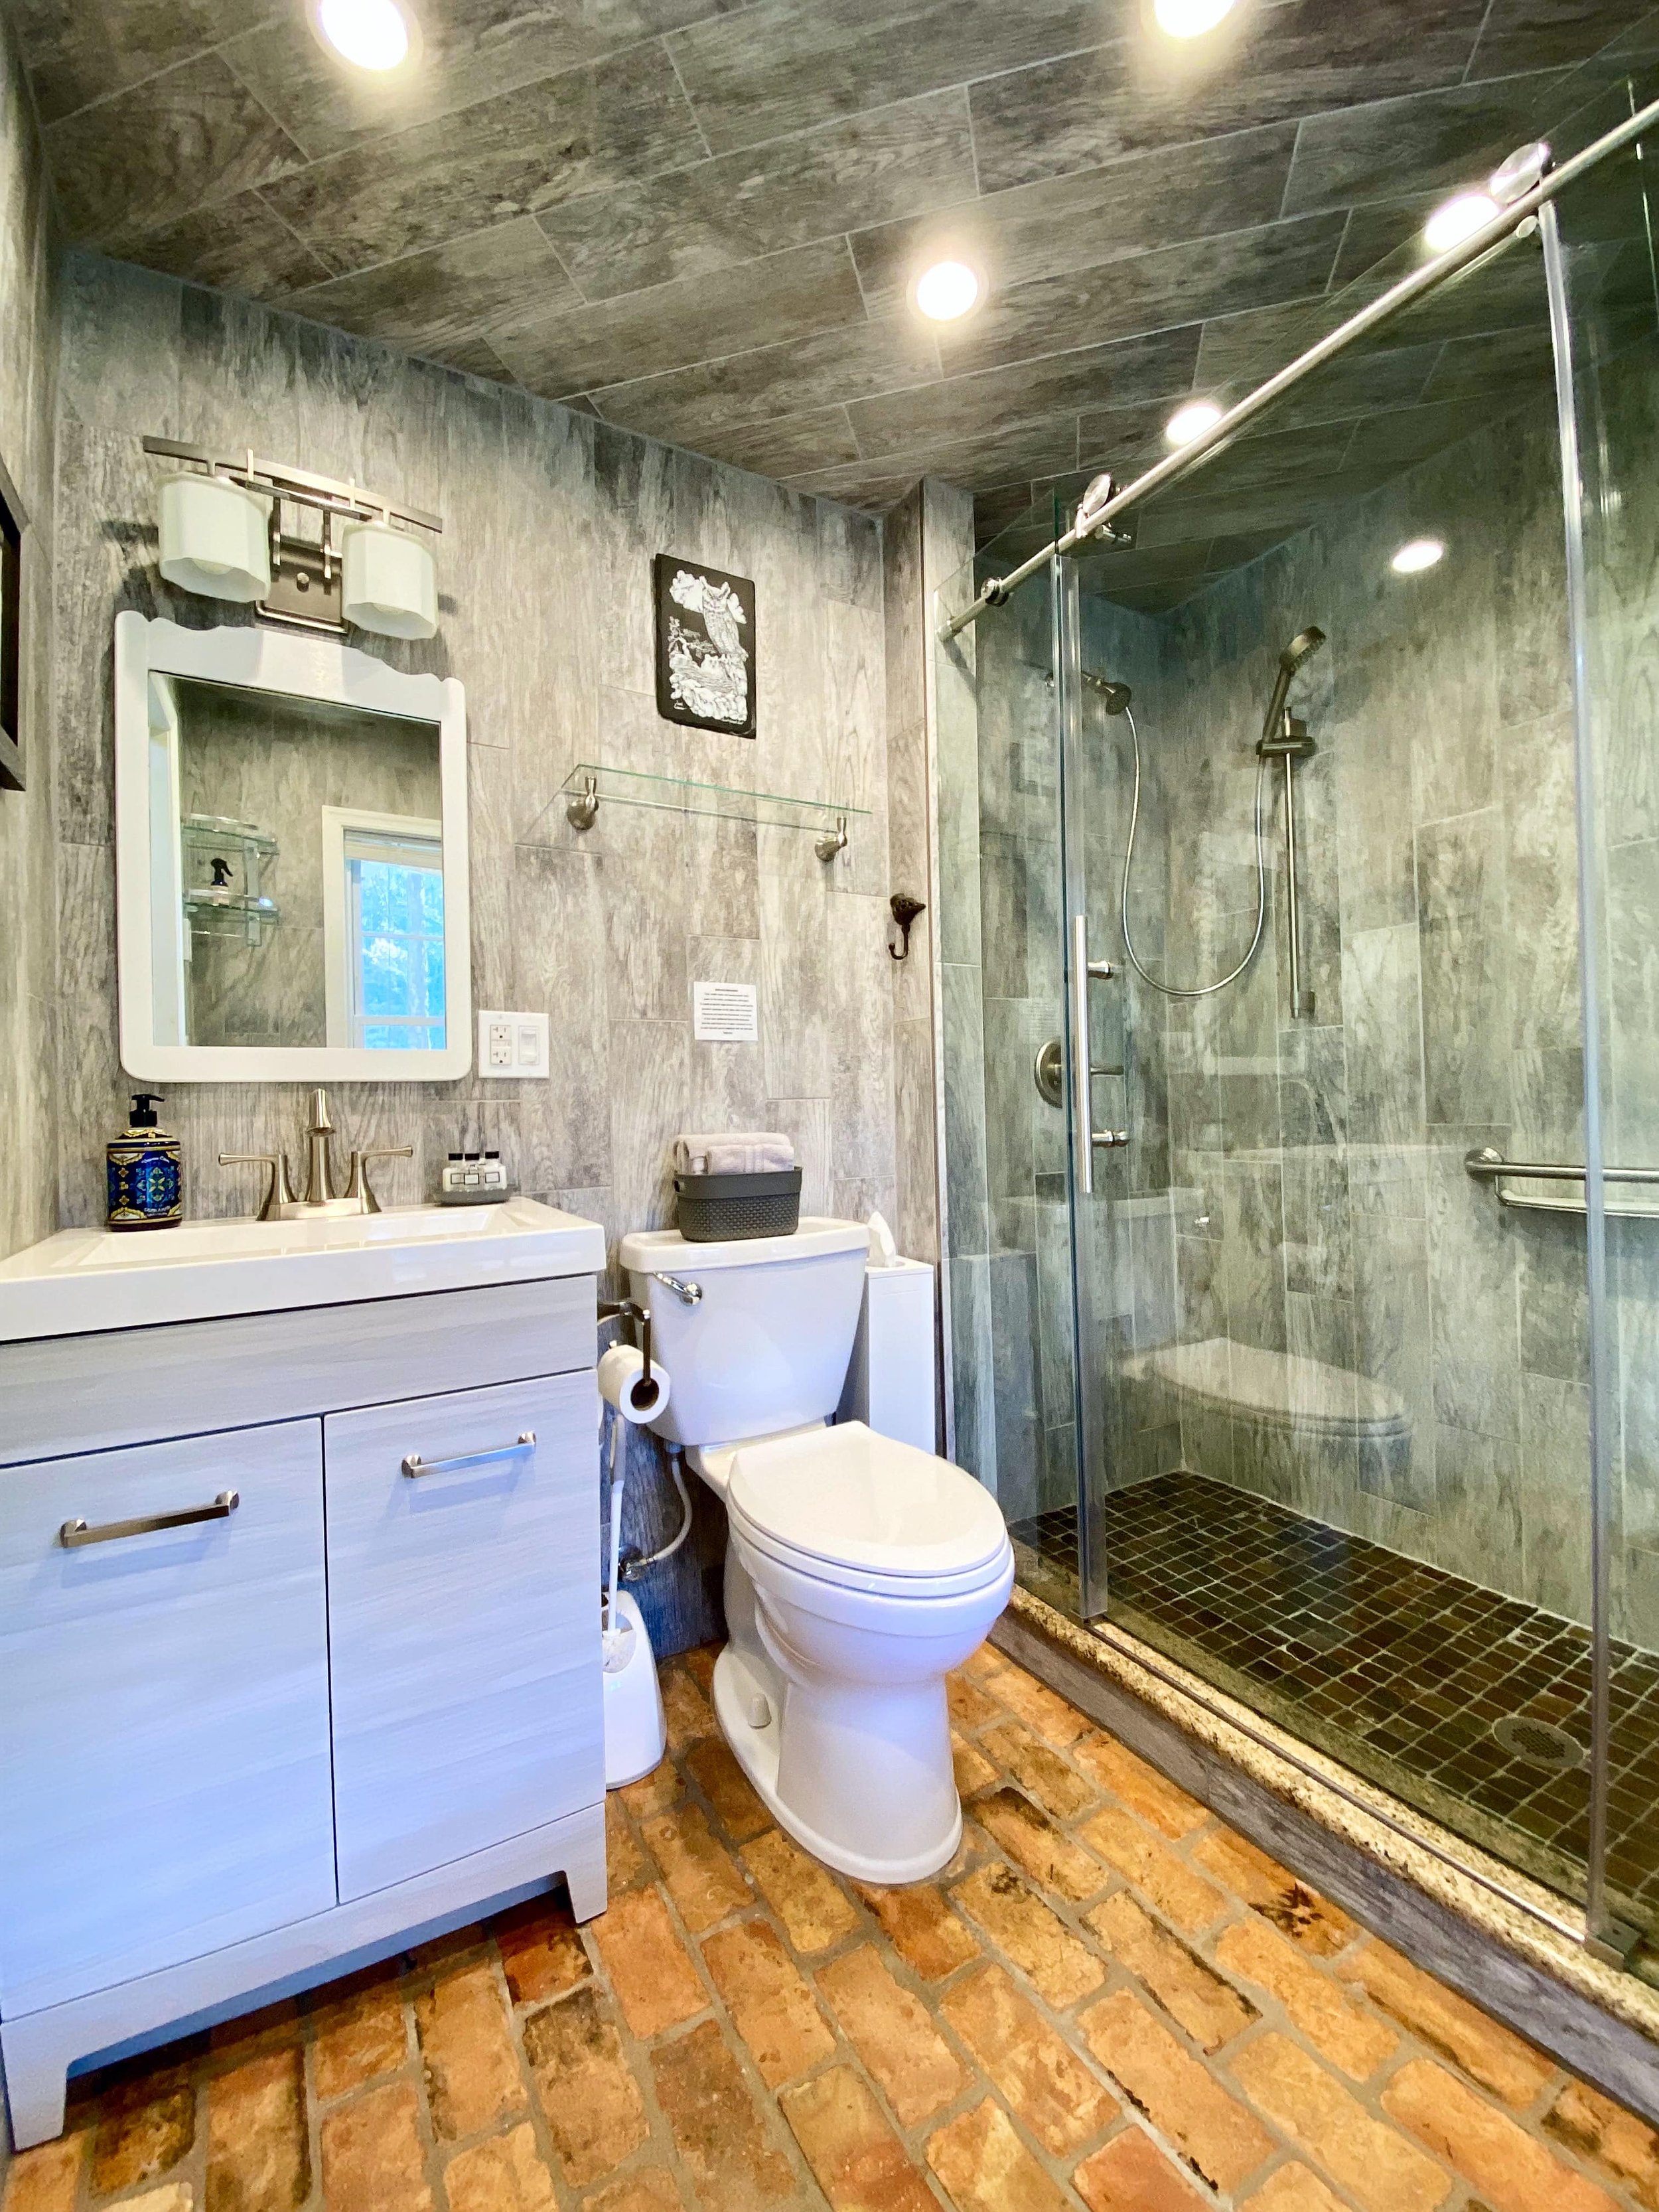 Bathroom Sink Toilet and Shower_Mission Possible Airbnb_NarrowsburgNY.JPG